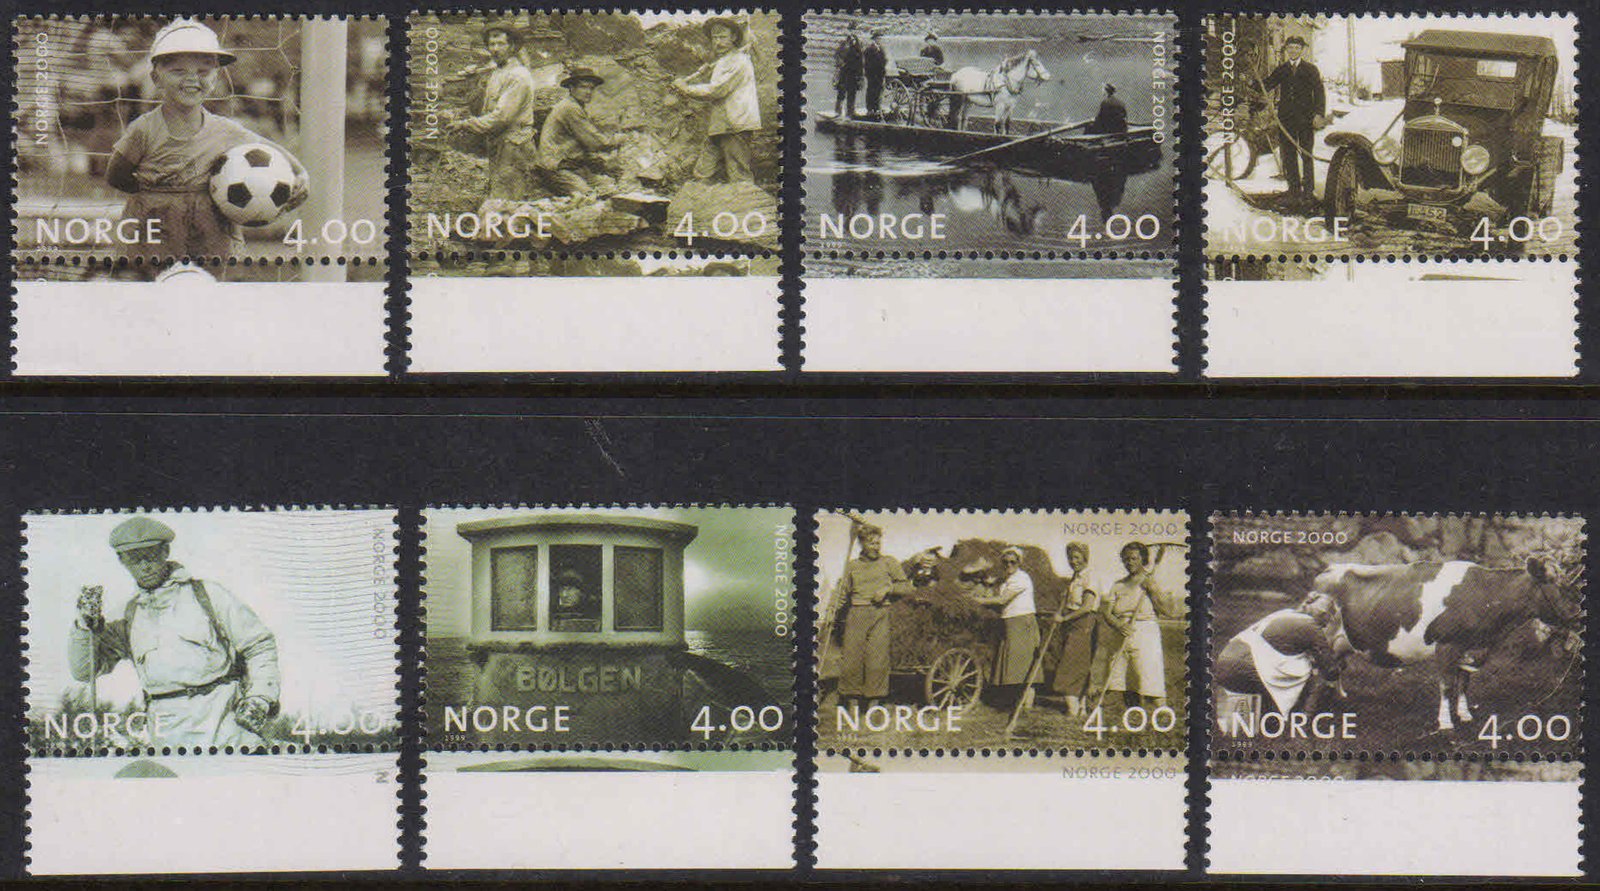 NORWAY 1999-Photographs of Life in Norway, Ferry, Milk, Cow, Football, Fishing Boat, Set of 8, MNH, S.G. 1346-52-Cat � 15-